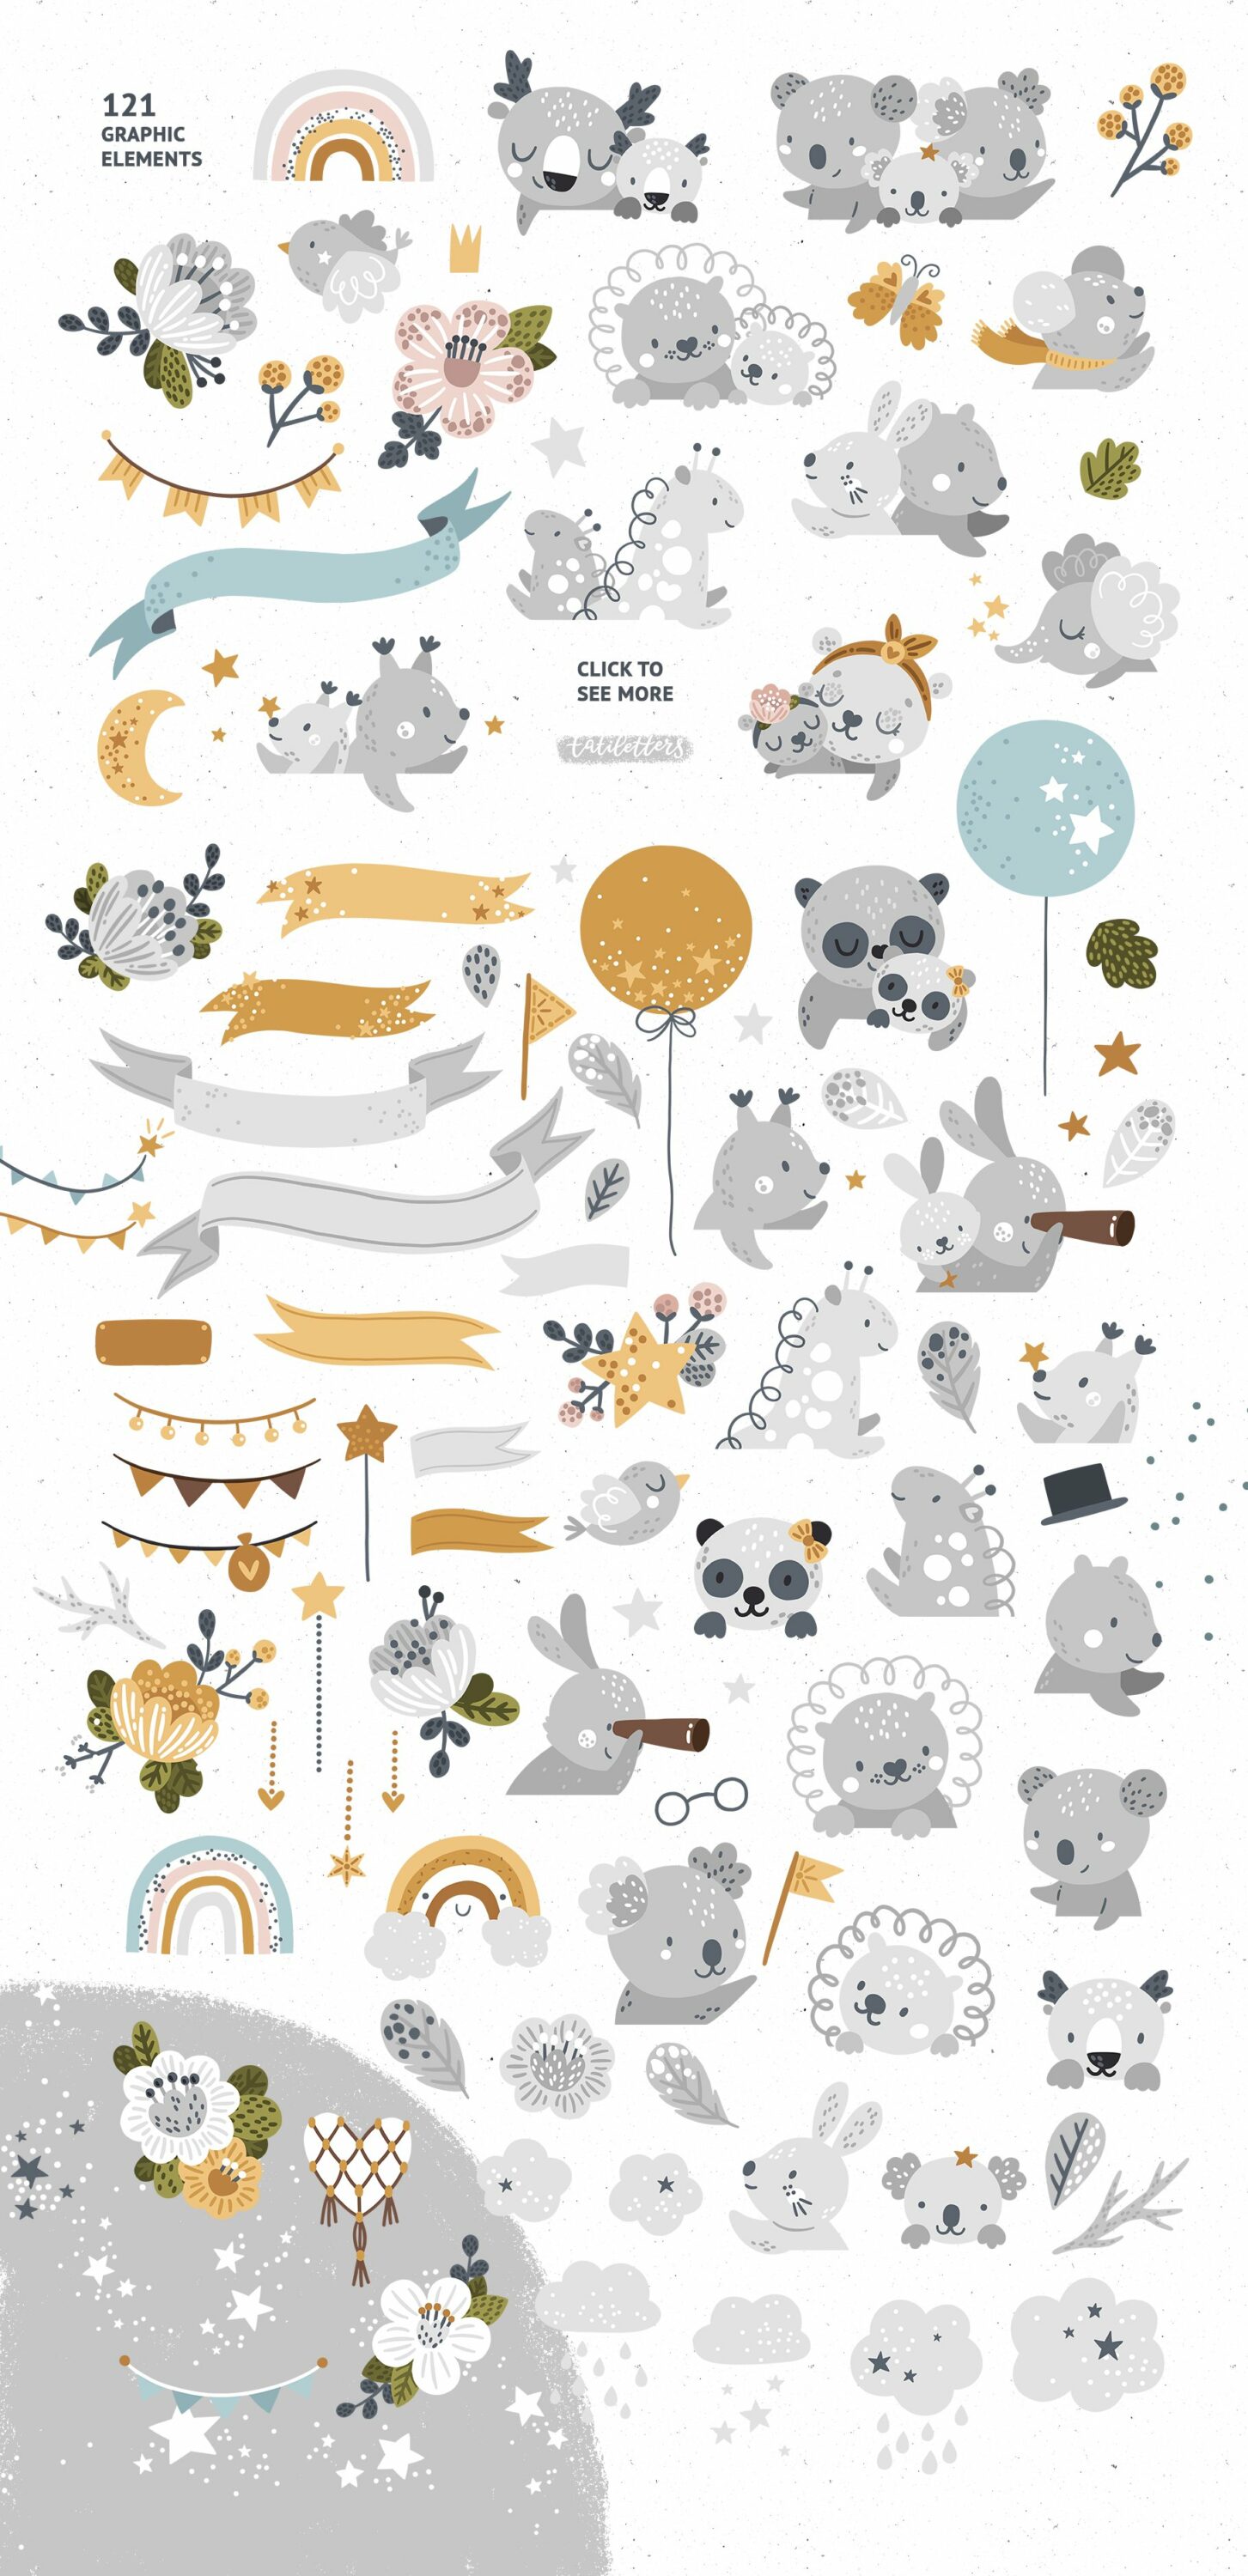 Grey animals and divers of forest elements.